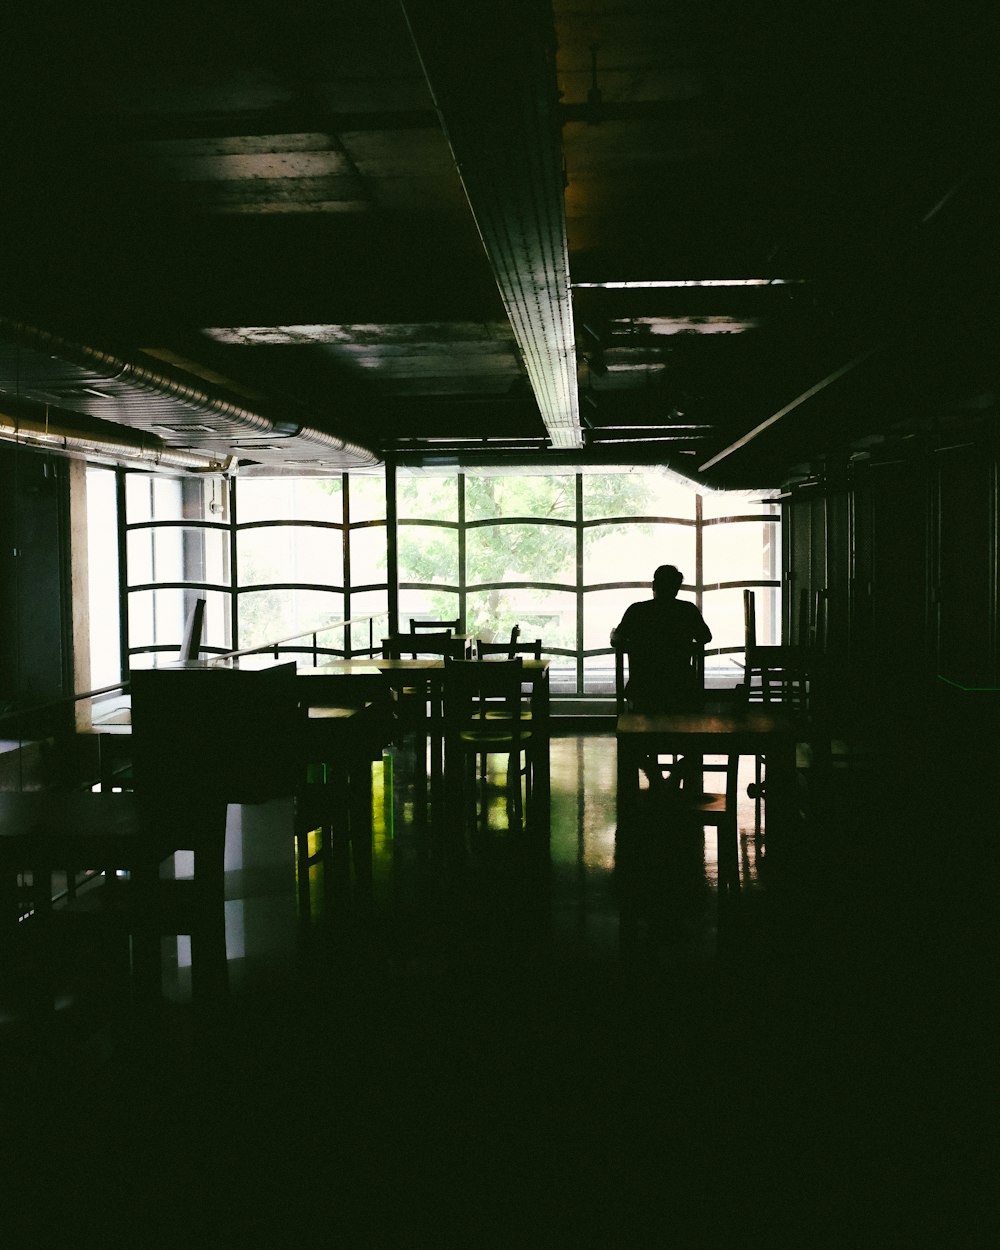 silhouette of person sitting on chair inside building